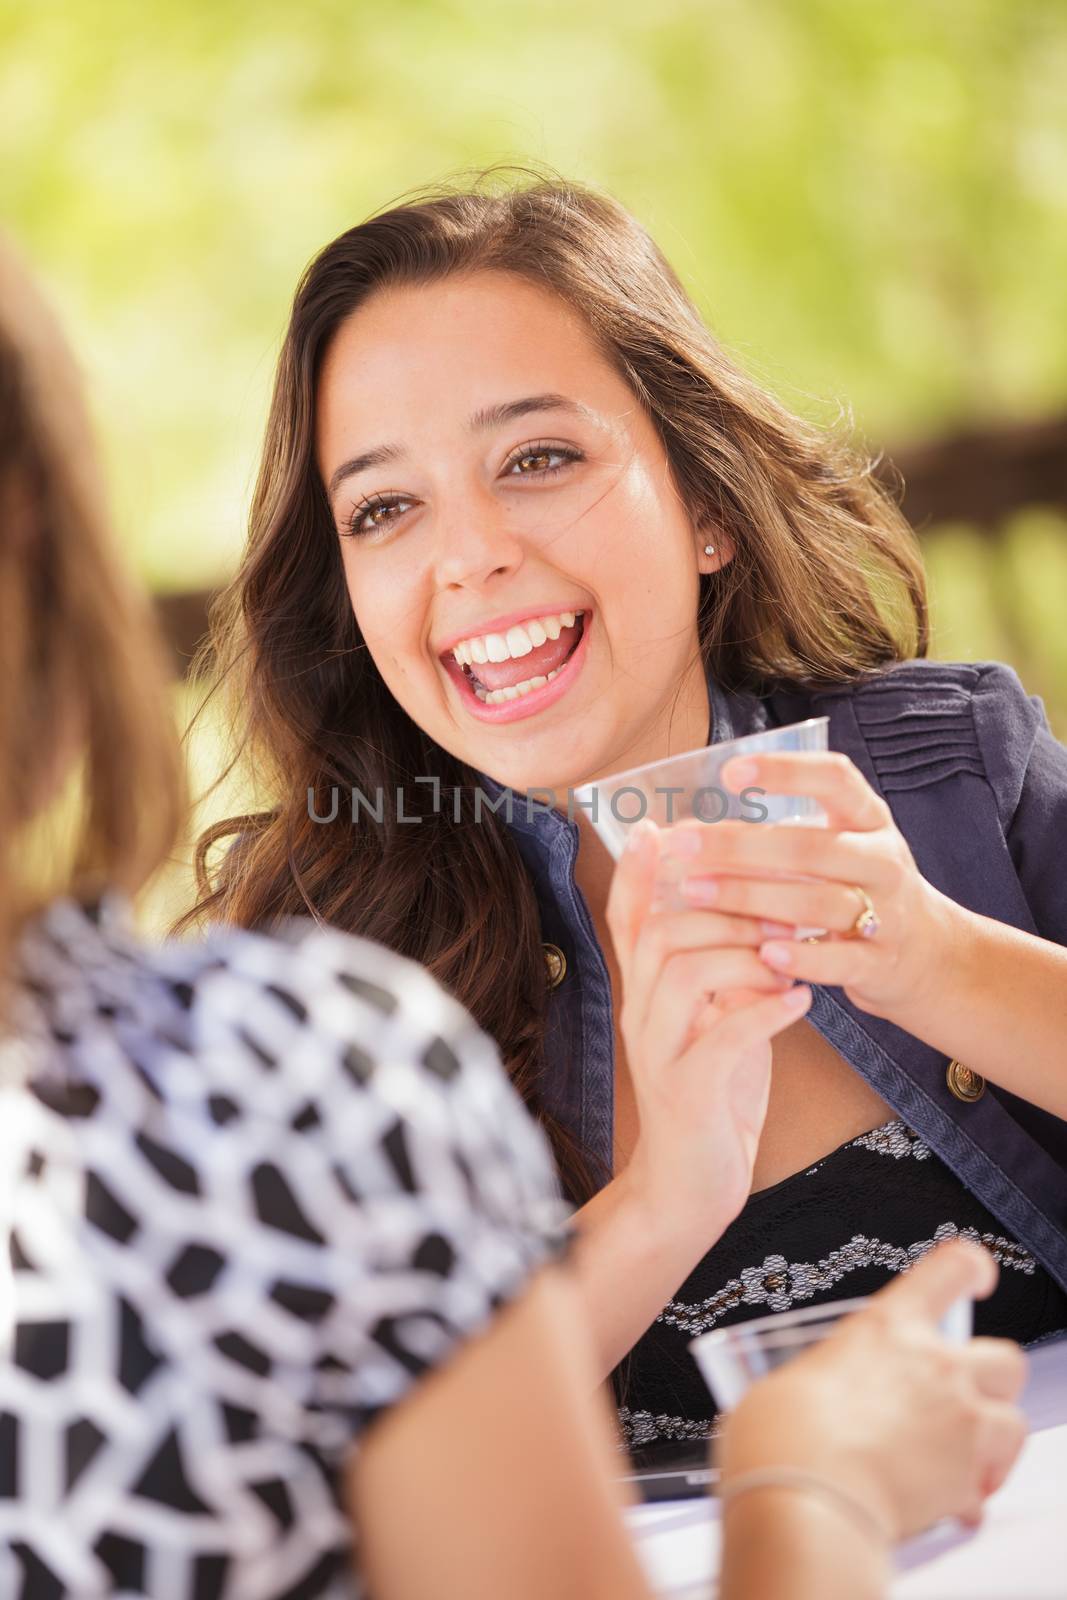 Expressive Young Adult Woman Having Drinks and Talking with Her Friend Outdoors